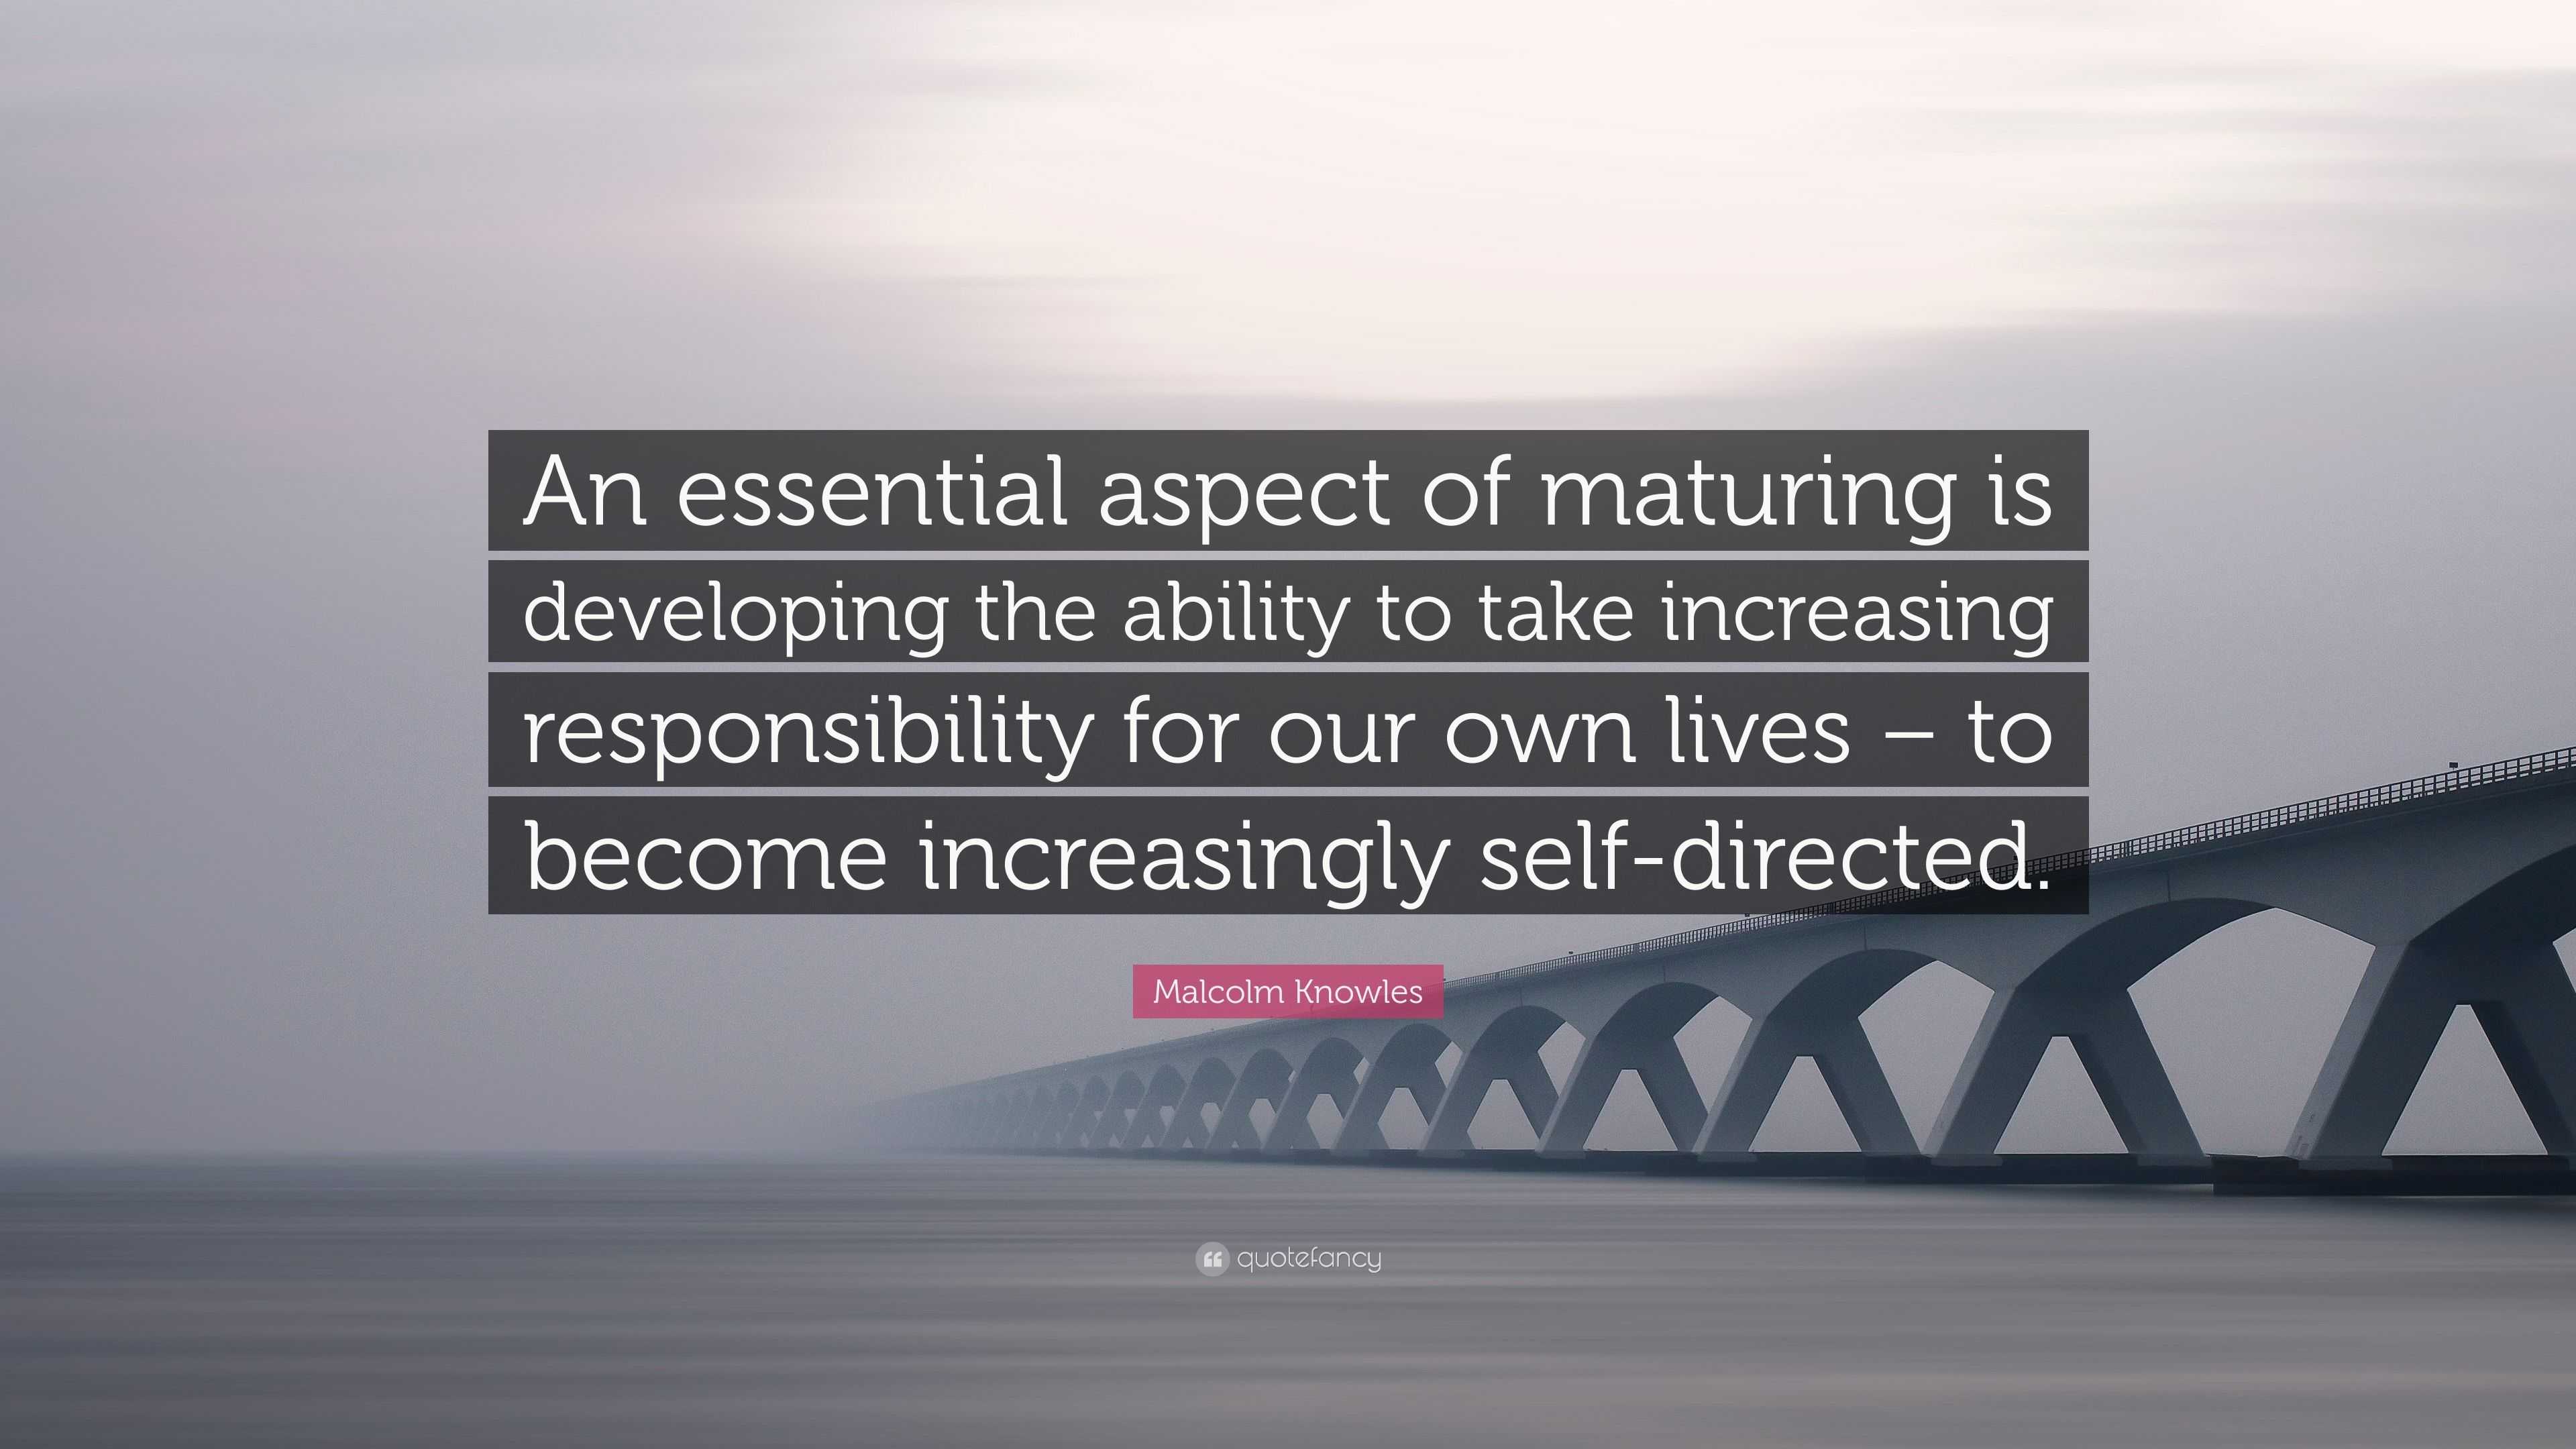 Malcolm Knowles Quote: “An essential aspect of maturing is developing